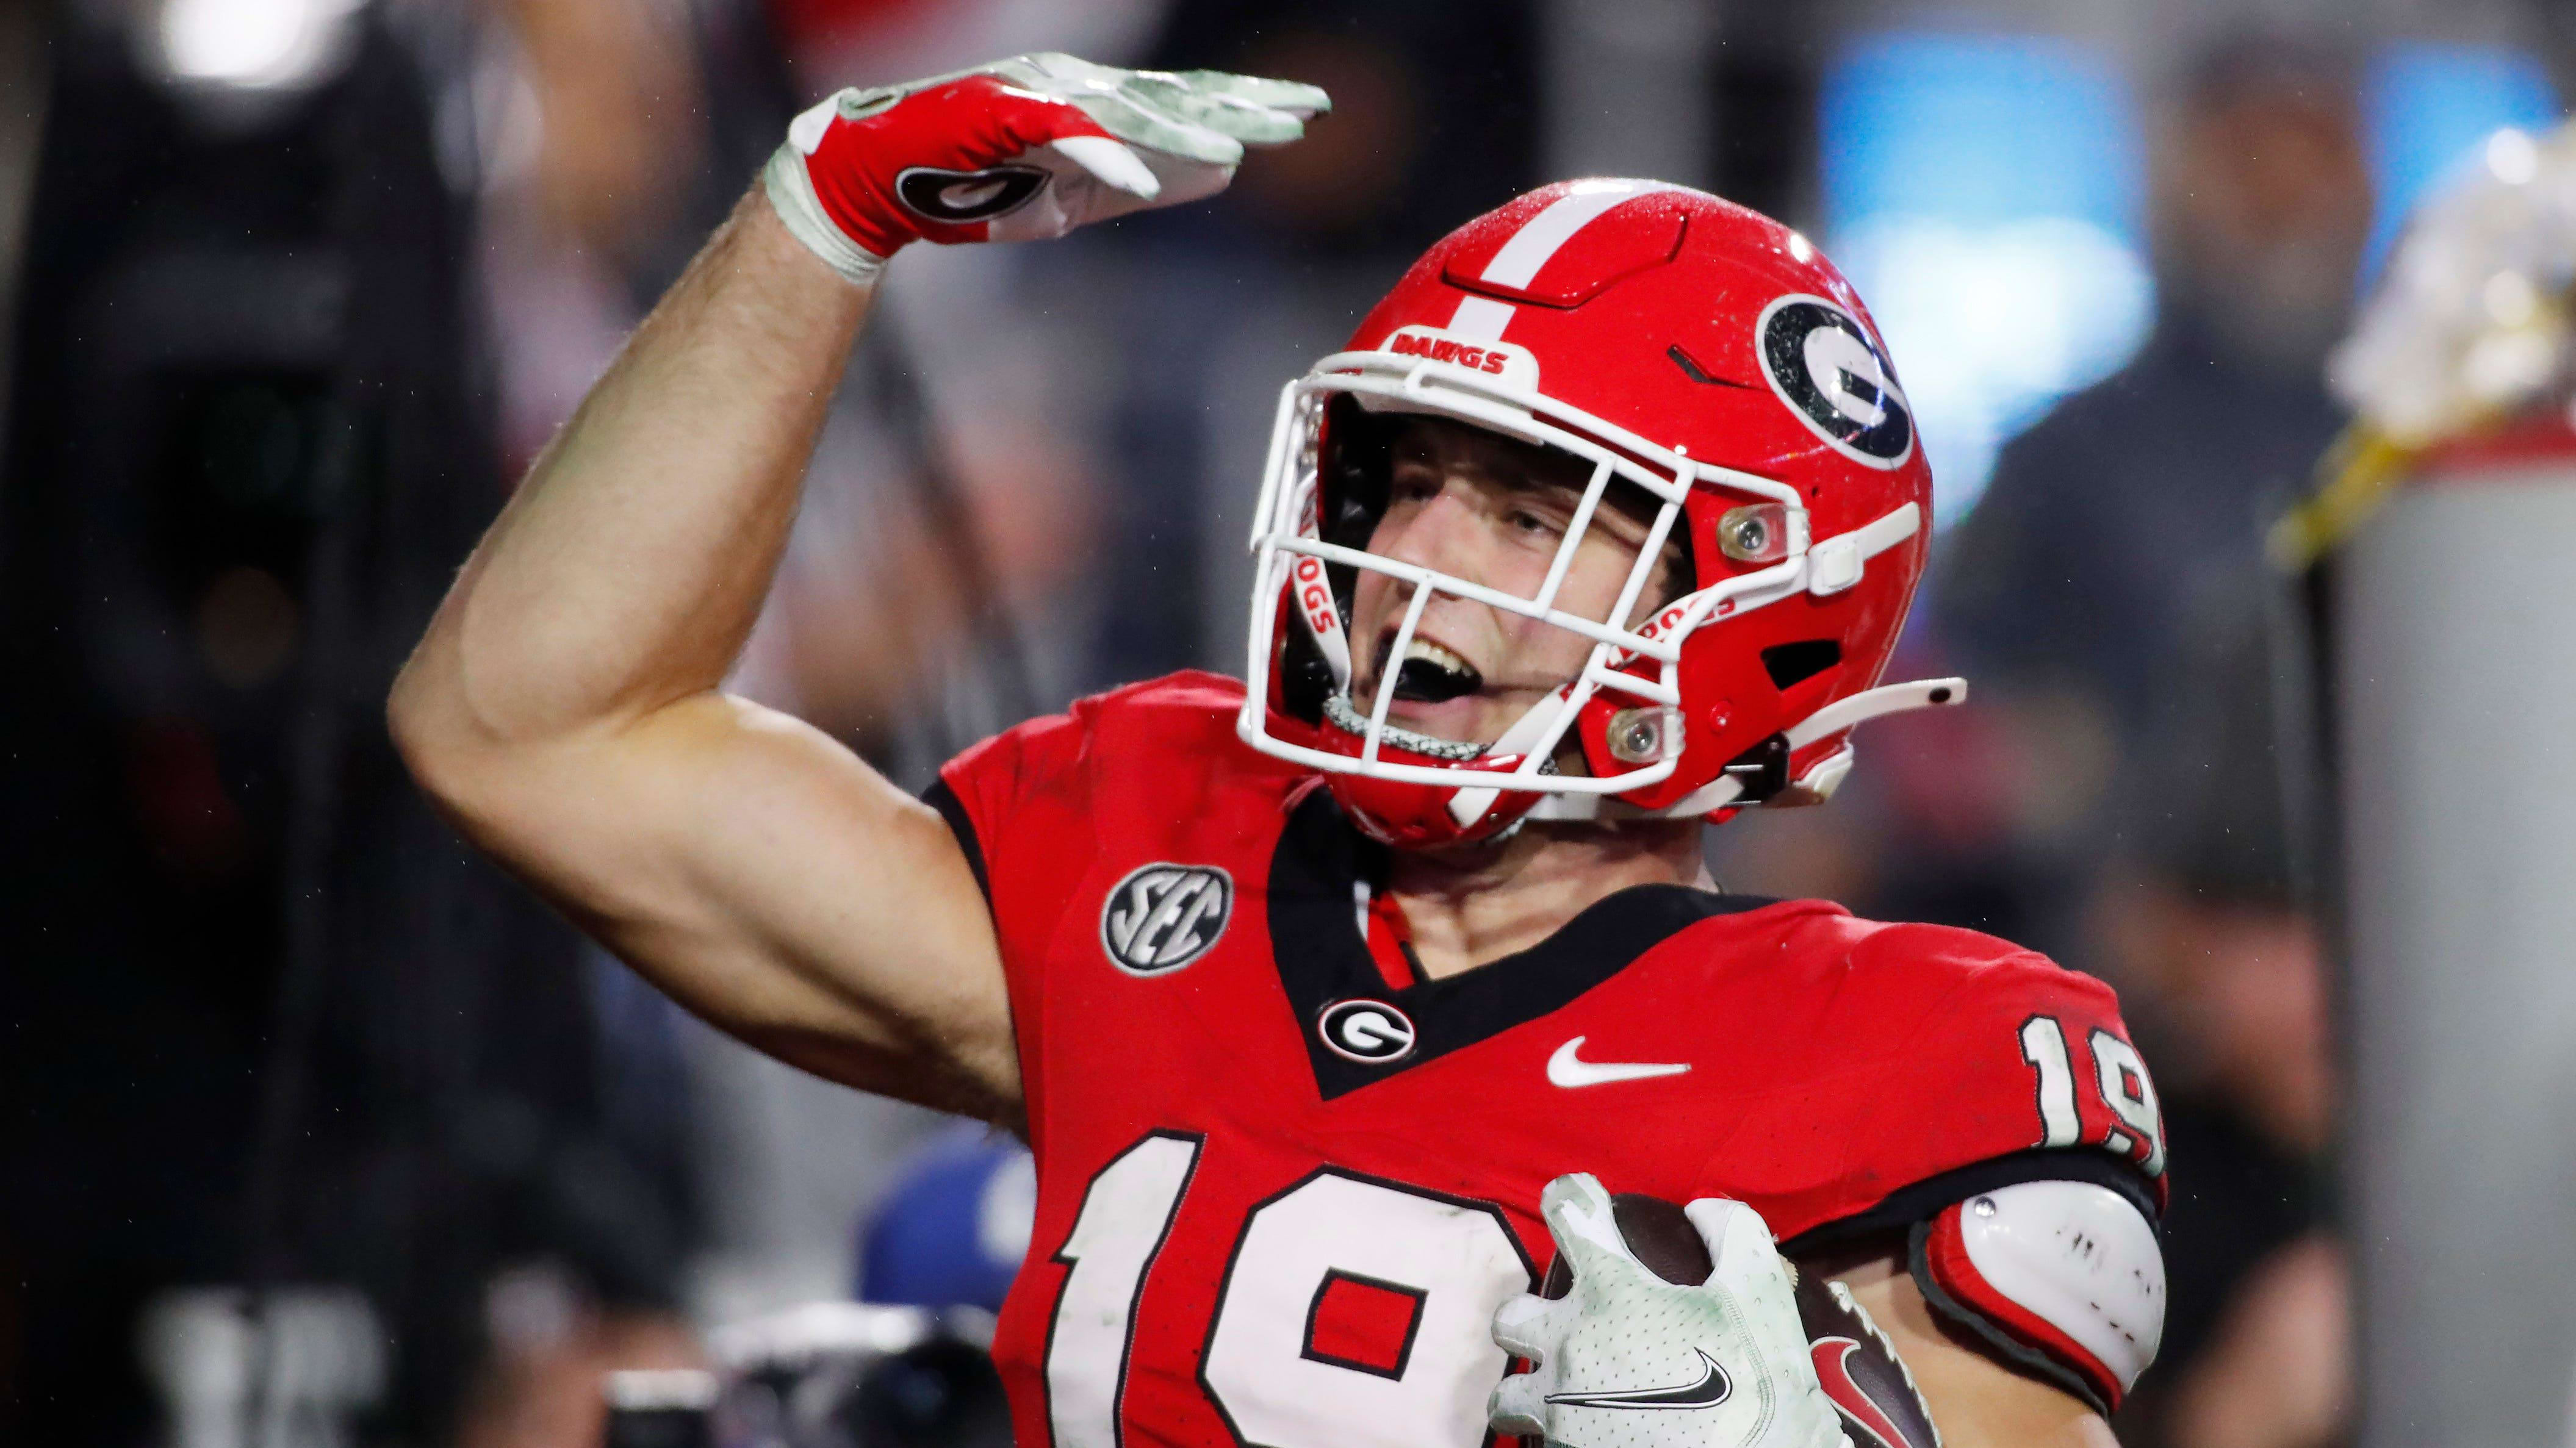 Georgia tight end Brock Bowers (19) celebrates after scoring a touchdown during the second half.